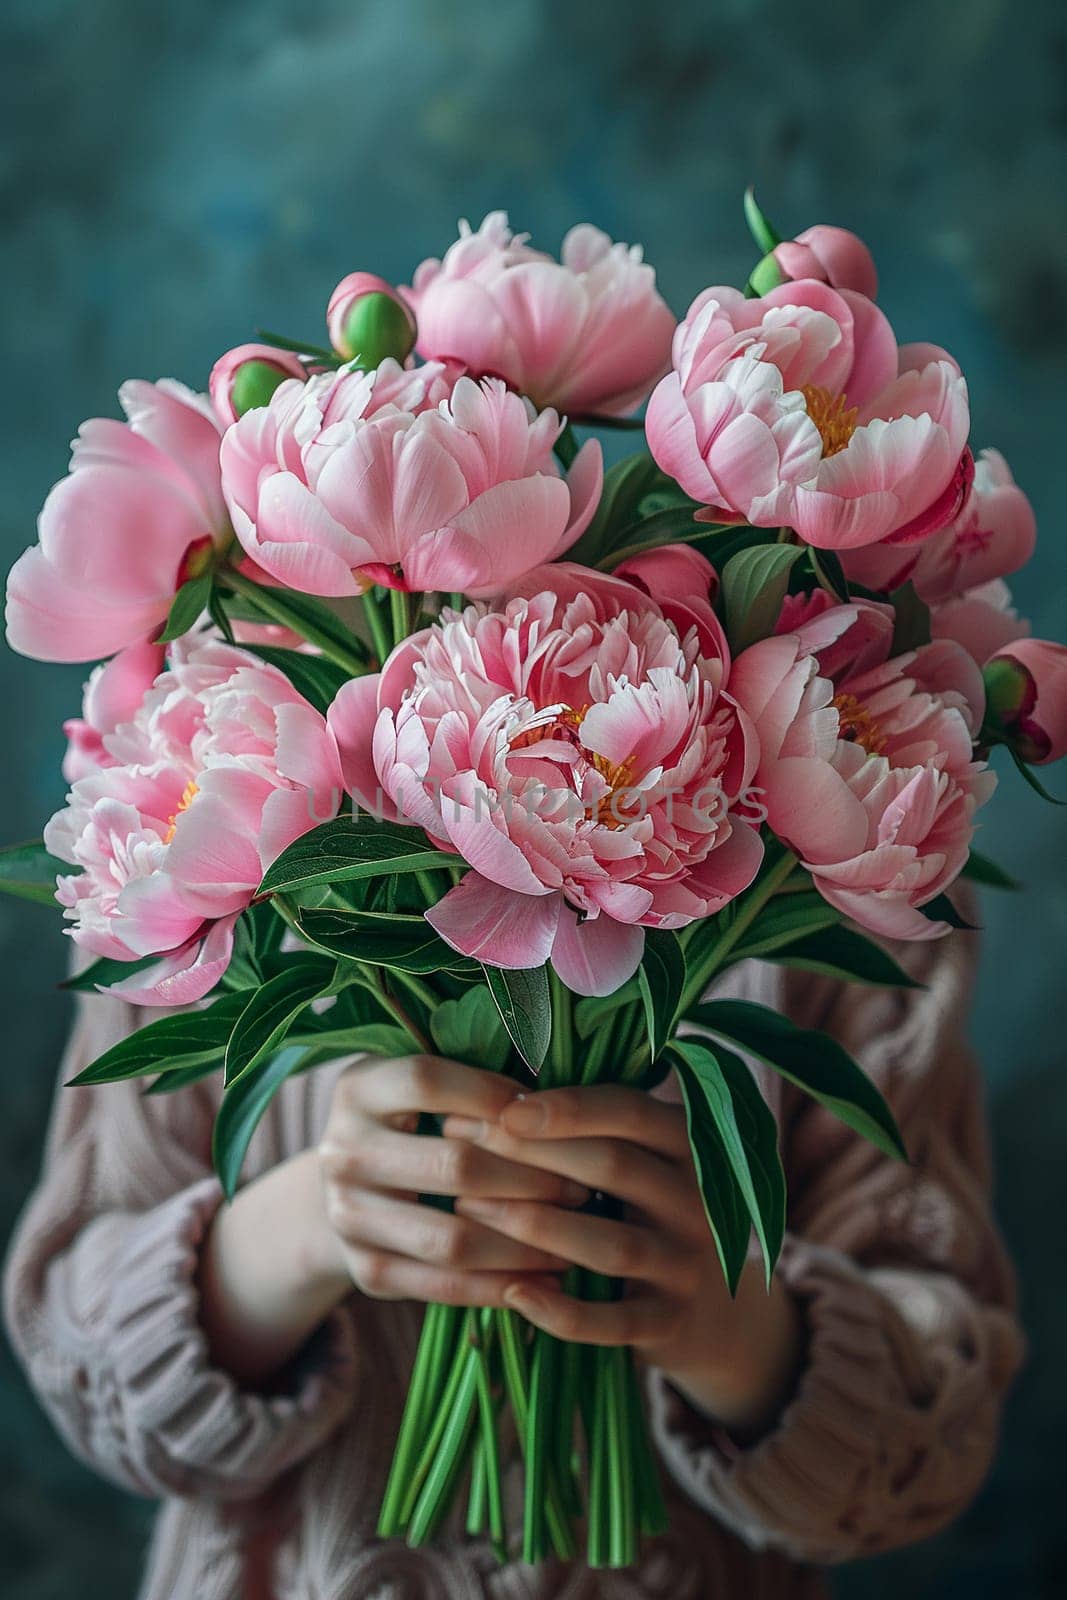 Hand holding a bouquet of fresh peonies, symbolizing natural beauty and inspiration.